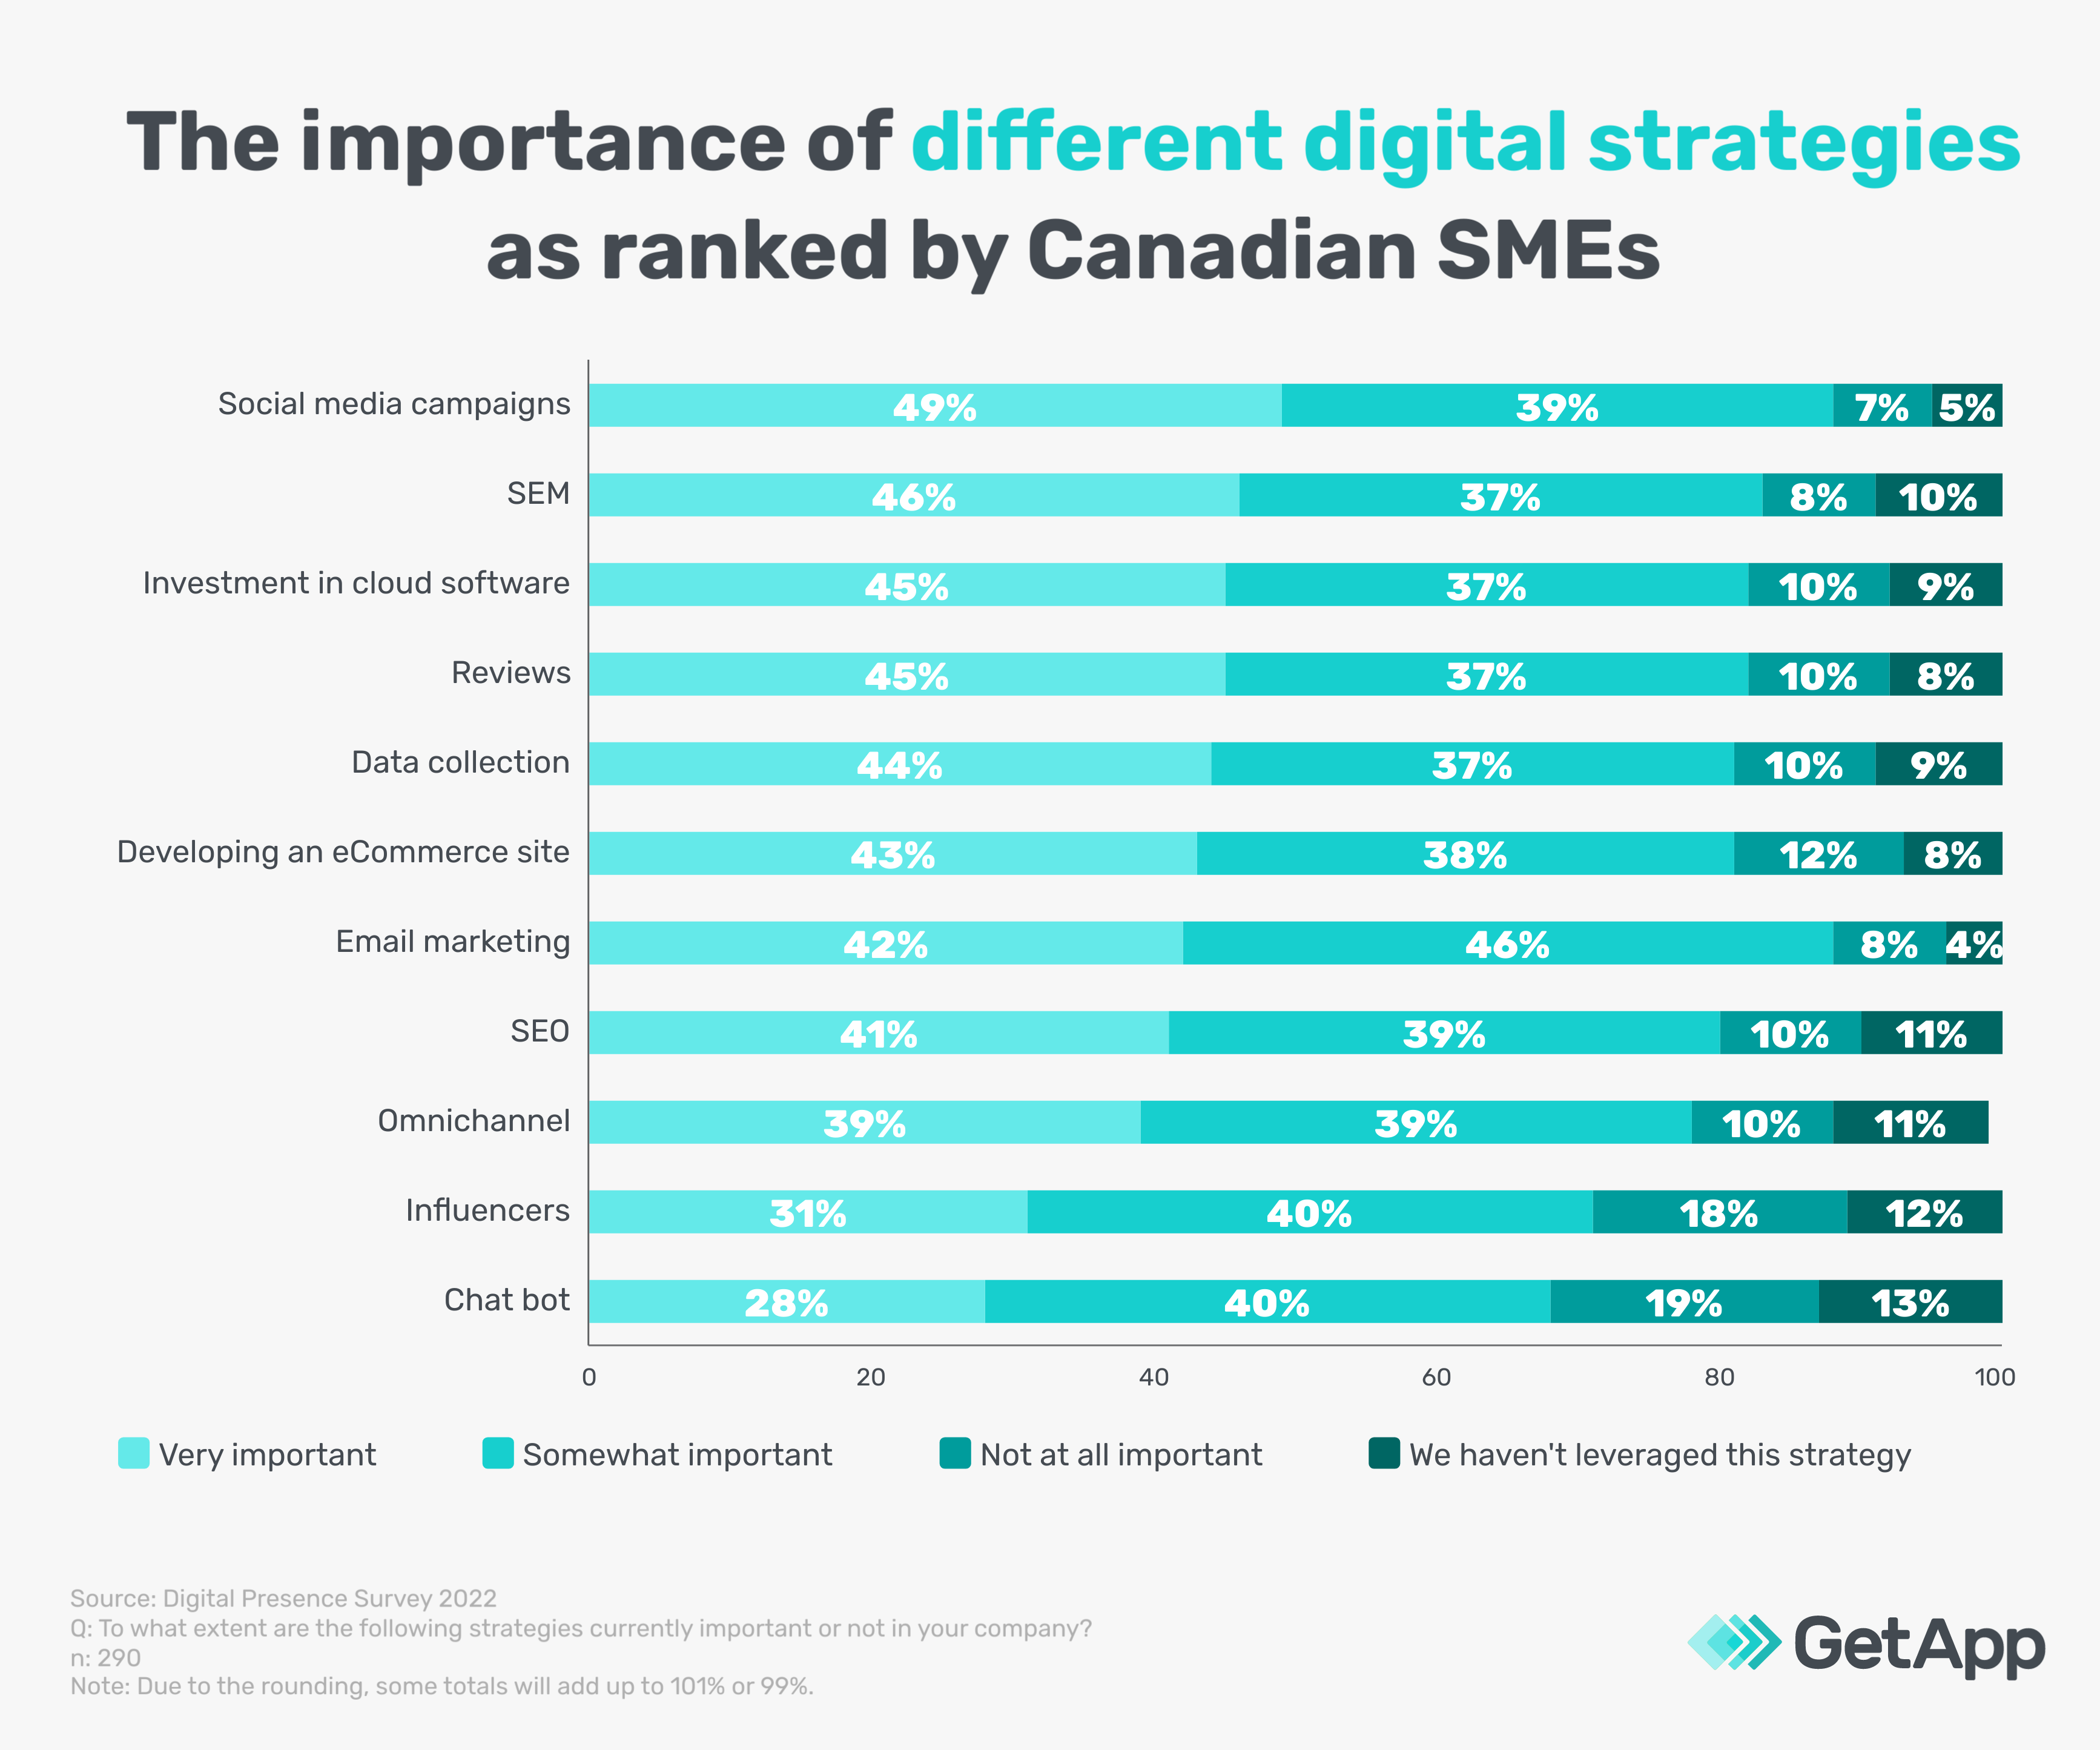 importance of digital trends 2022 ranked by SMEs in Canada